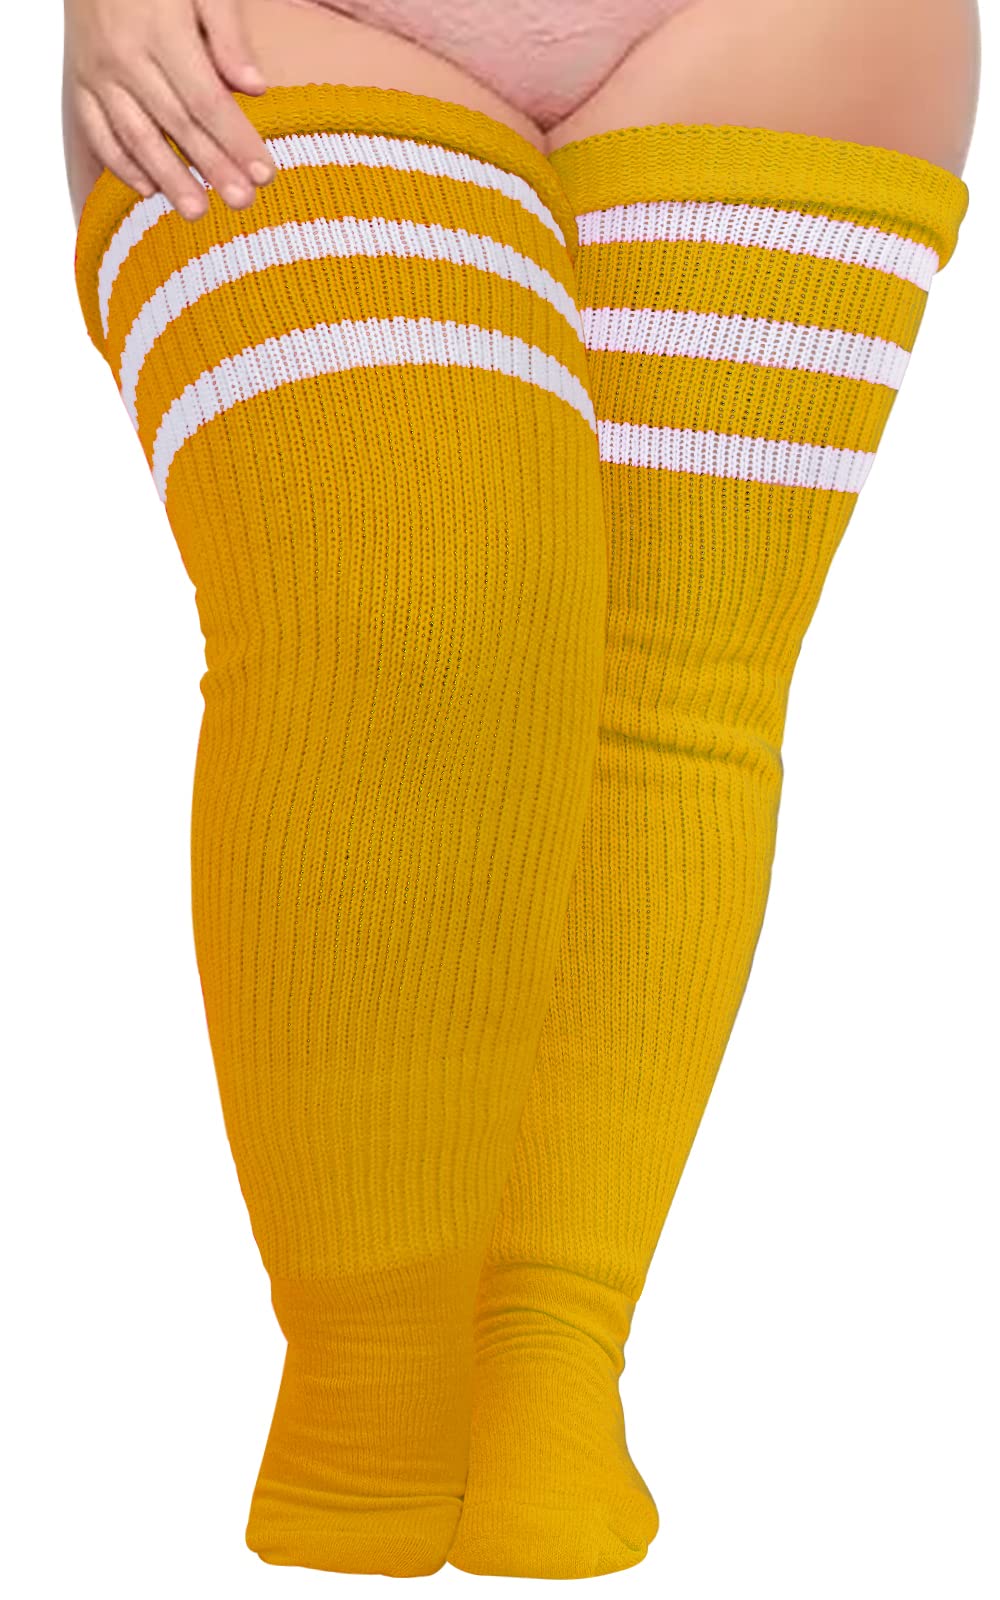 Plus Size Thigh High Socks Striped- Bright Ginger Yellow & White - Moon Wood